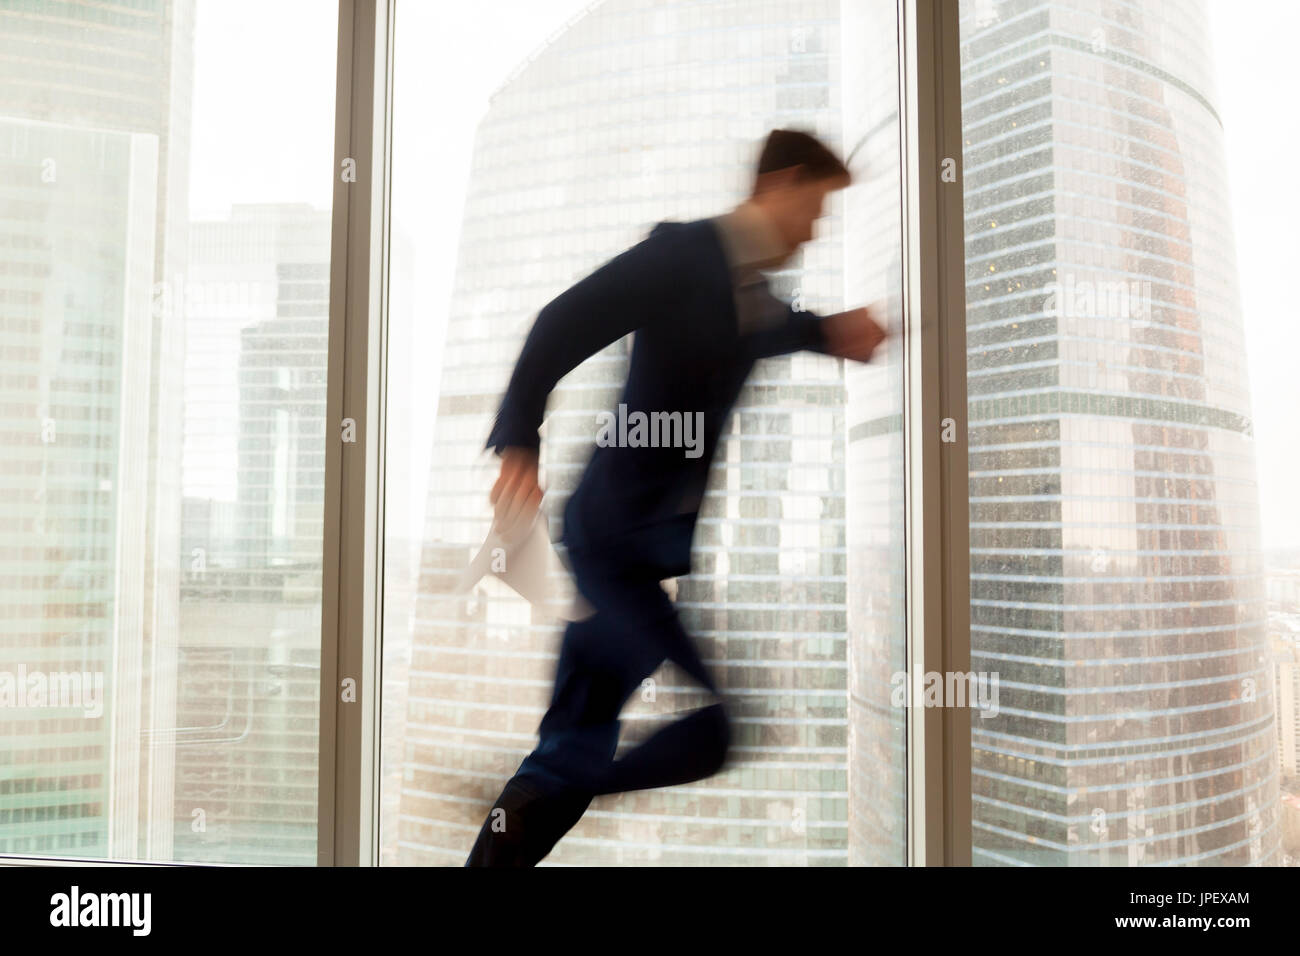 Busy businessman hurrying up, getting late, city view, motion bl Stock Photo